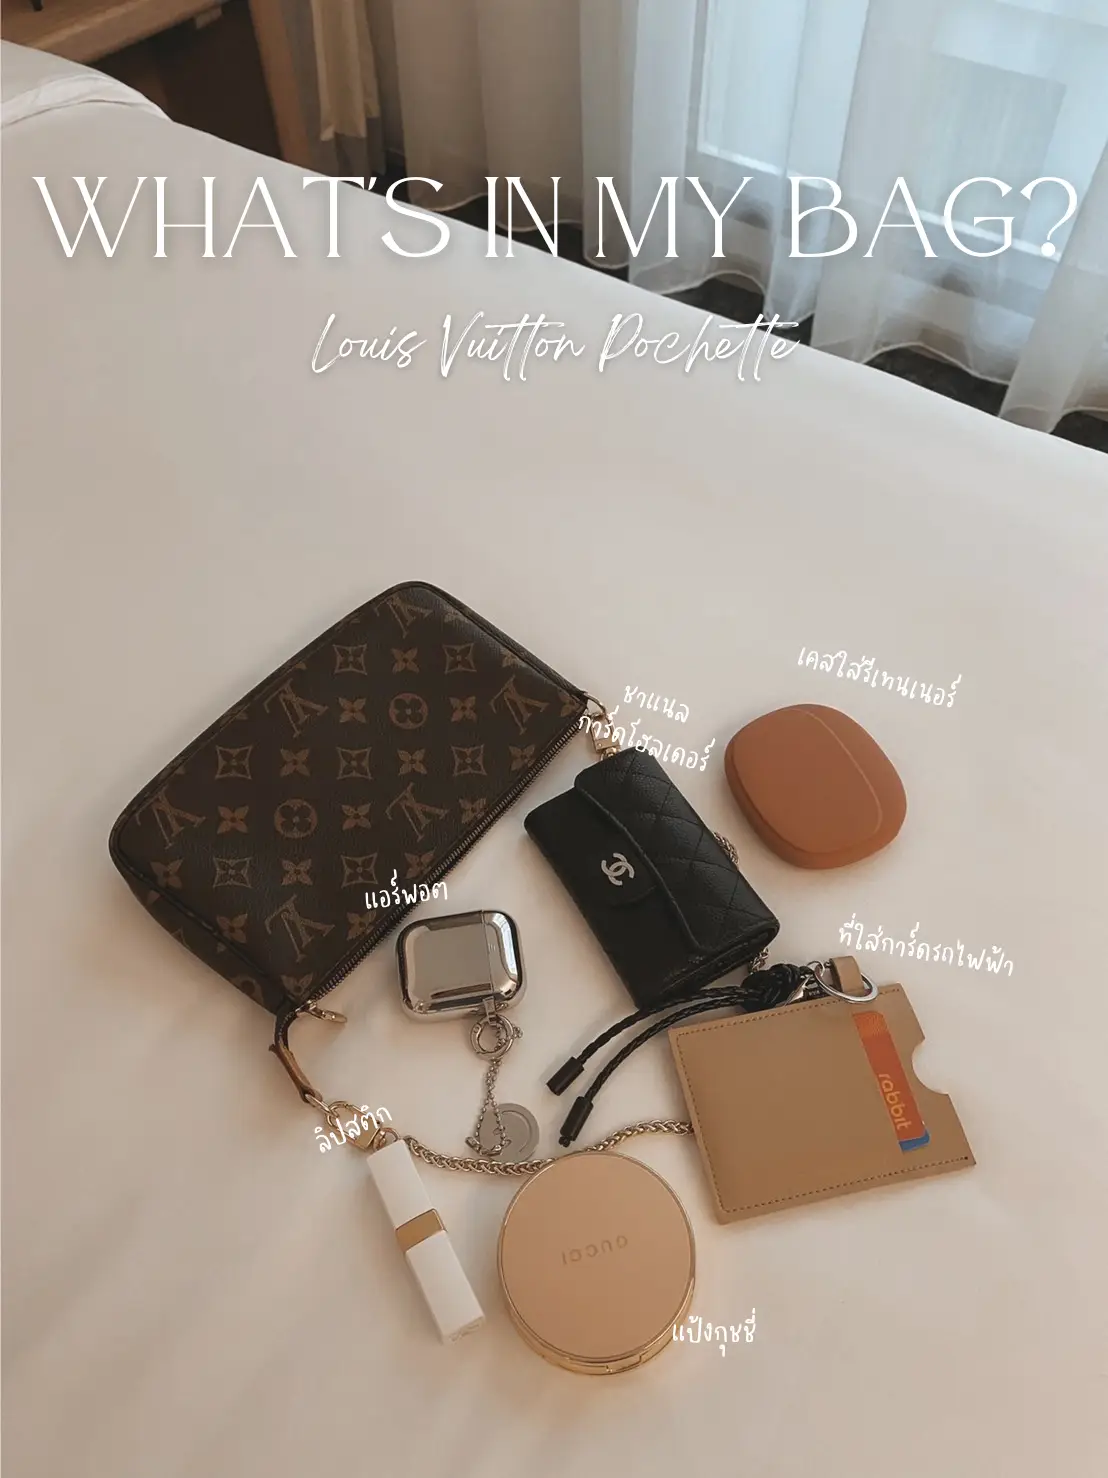 💖What's in my Bag? What's the LV Bag on?💖